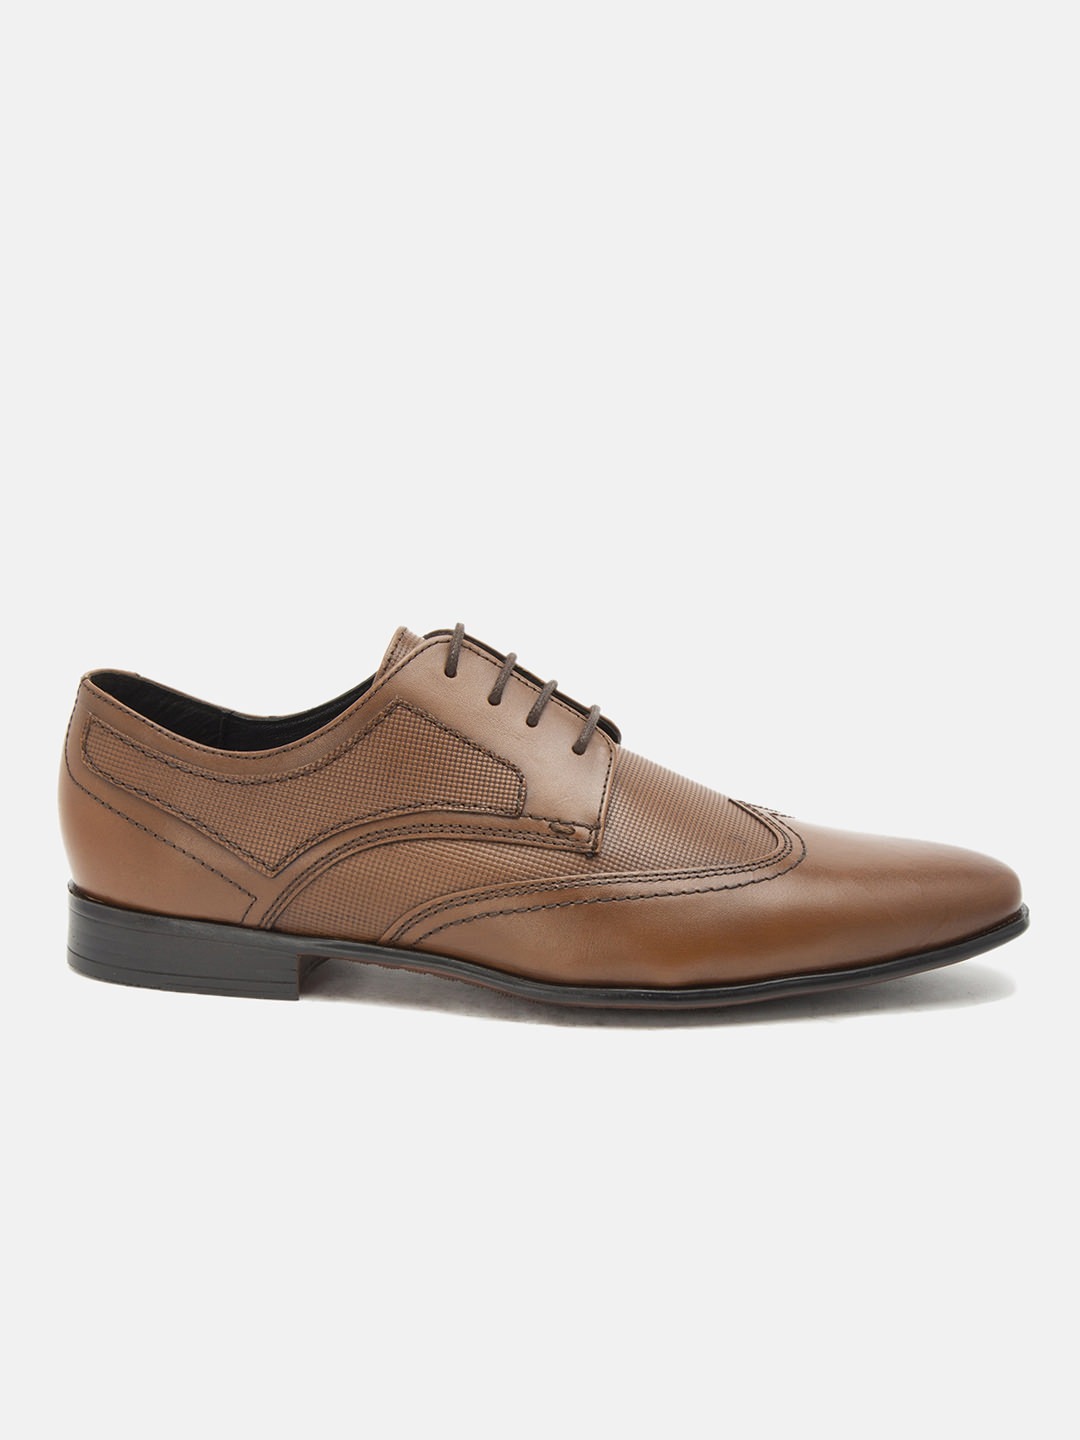 Buy Online Genuine Leather Derby Shoes for Men's | Hats Off Accessories